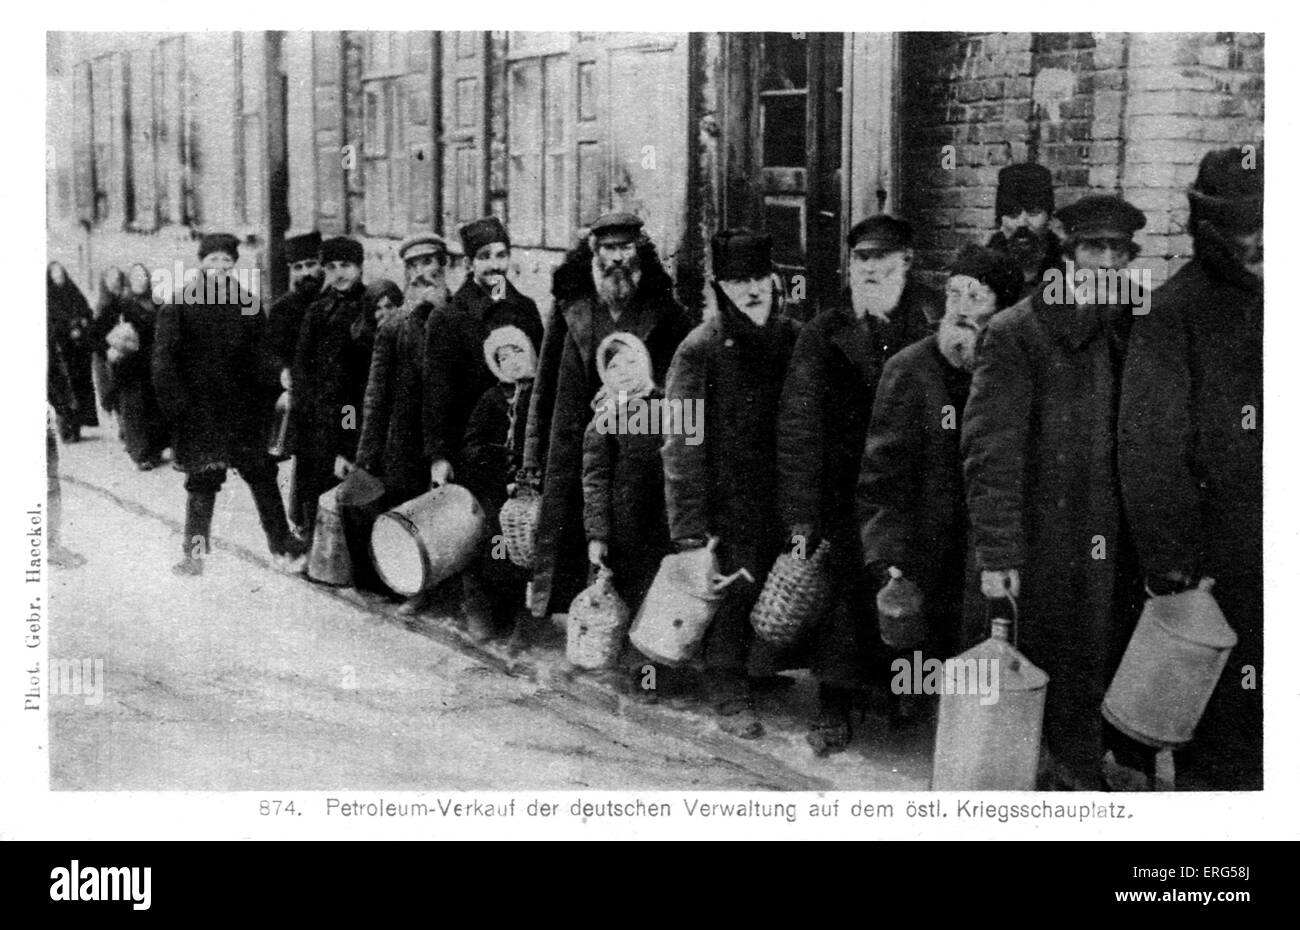 German Occupation on the Eastern Front in World War I. Taken from photograph, shows local people (Poles) queuing to buy petrol Stock Photo